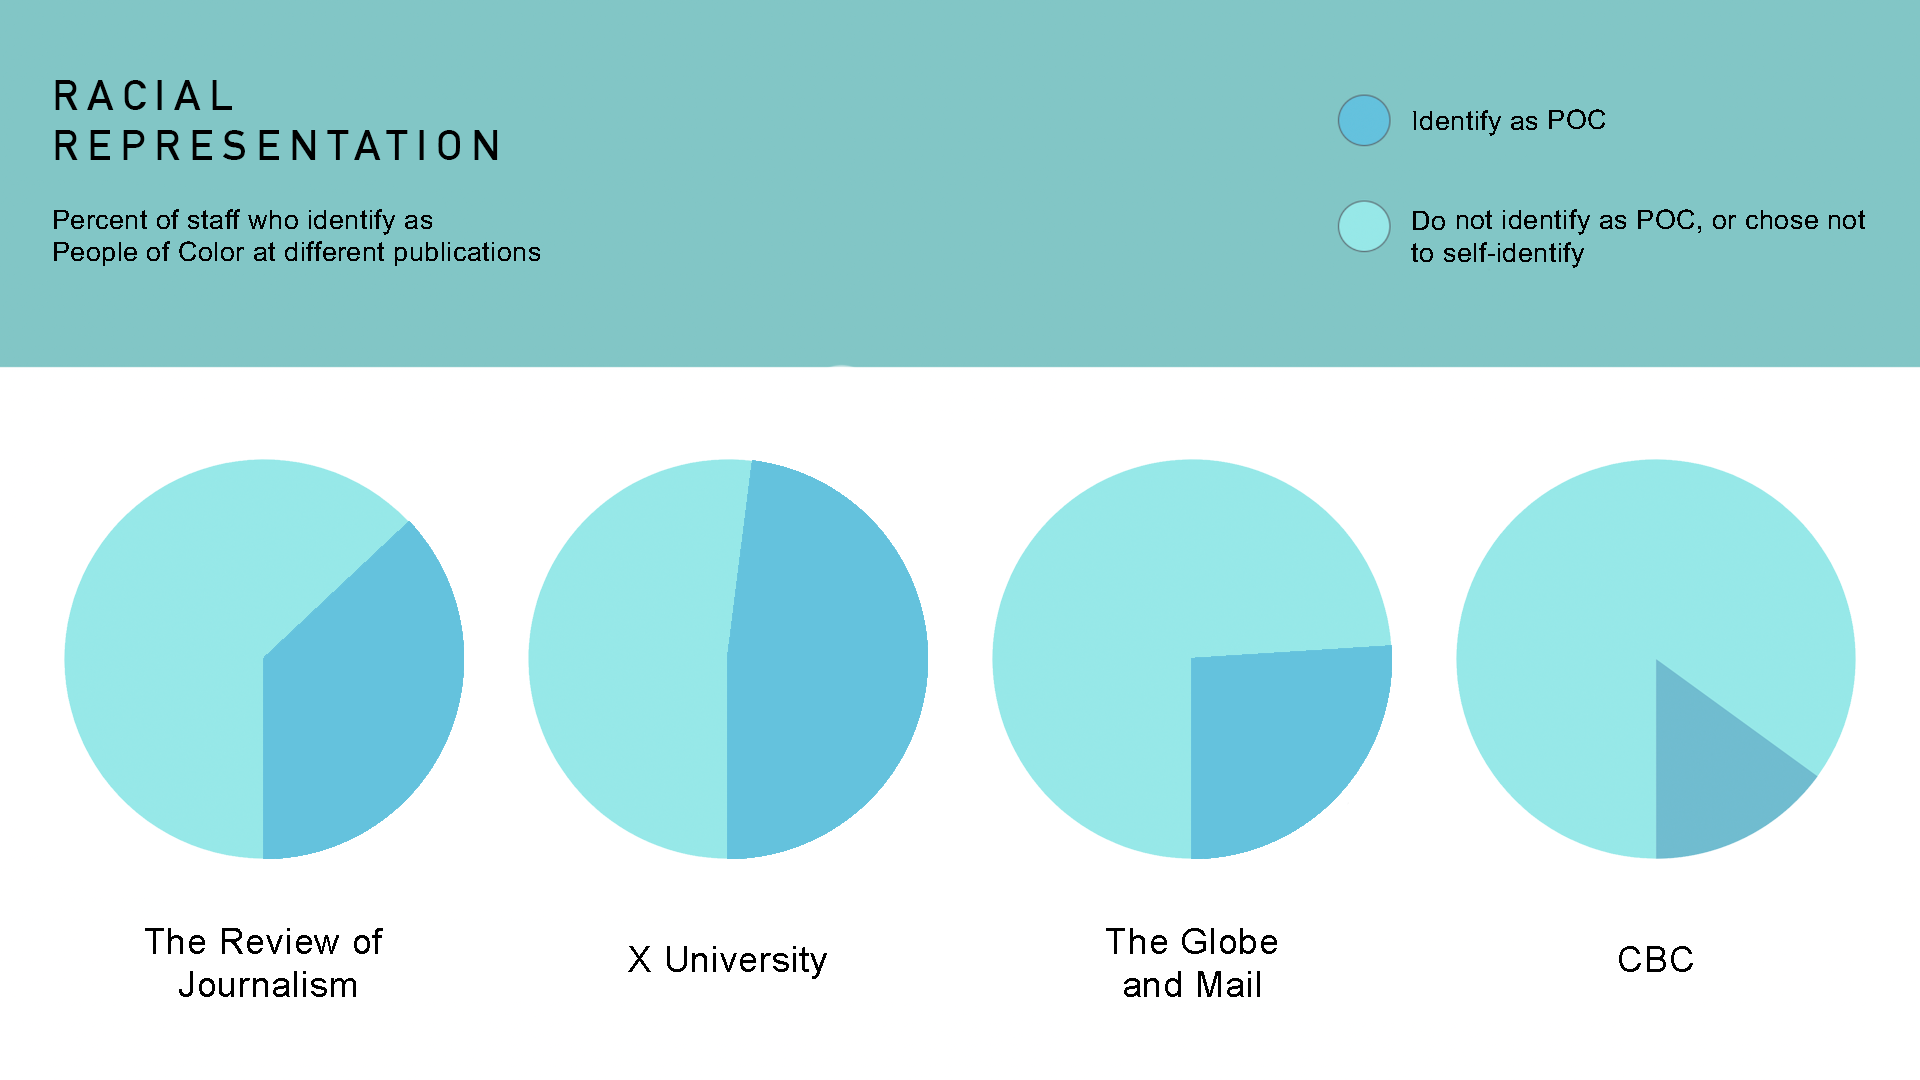 Four comparative pie charts representing the percentage of the staff who identify as people of colour at The Review of Journalism, X University, The Globe and Mail, and CBC/Radio Canada.